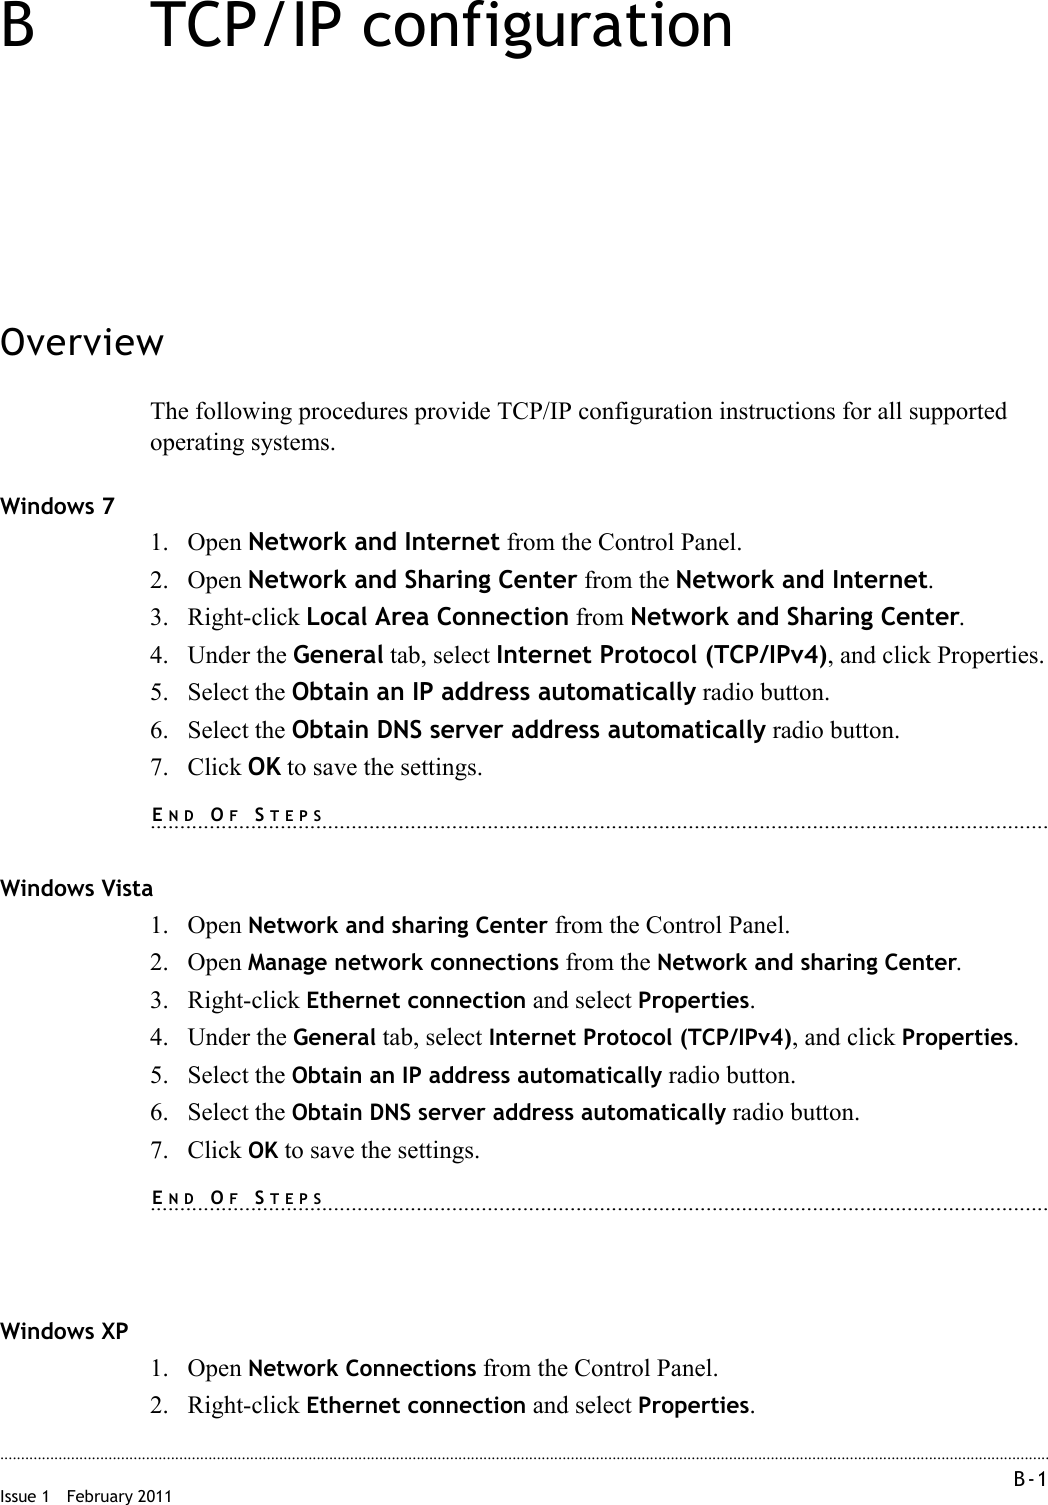 B-1 Issue 1 February 2011............................................................................................................................................................................................................................................................B TCP/IP configurationOverviewThe following procedures provide TCP/IP configuration instructions for all supported operating systems.Windows 71. Open Network and Internet from the Control Panel.2. Open Network and Sharing Center from the Network and Internet.3. Right-click Local Area Connection from Network and Sharing Center.4. Under the General tab, select Internet Protocol (TCP/IPv4), and click Properties.5. Select the Obtain an IP address automatically radio button.6. Select the Obtain DNS server address automatically radio button.7. Click OK to save the settings.........................................................................................................................................................END OF STEPSWindows Vista1. Open Network and sharing Center from the Control Panel.2. Open Manage network connections from the Network and sharing Center.3. Right-click Ethernet connection and select Properties.4. Under the General tab, select Internet Protocol (TCP/IPv4), and click Properties.5. Select the Obtain an IP address automatically radio button.6. Select the Obtain DNS server address automatically radio button.7. Click OK to save the settings.........................................................................................................................................................END OF STEPSWindows XP1. Open Network Connections from the Control Panel.2. Right-click Ethernet connection and select Properties.